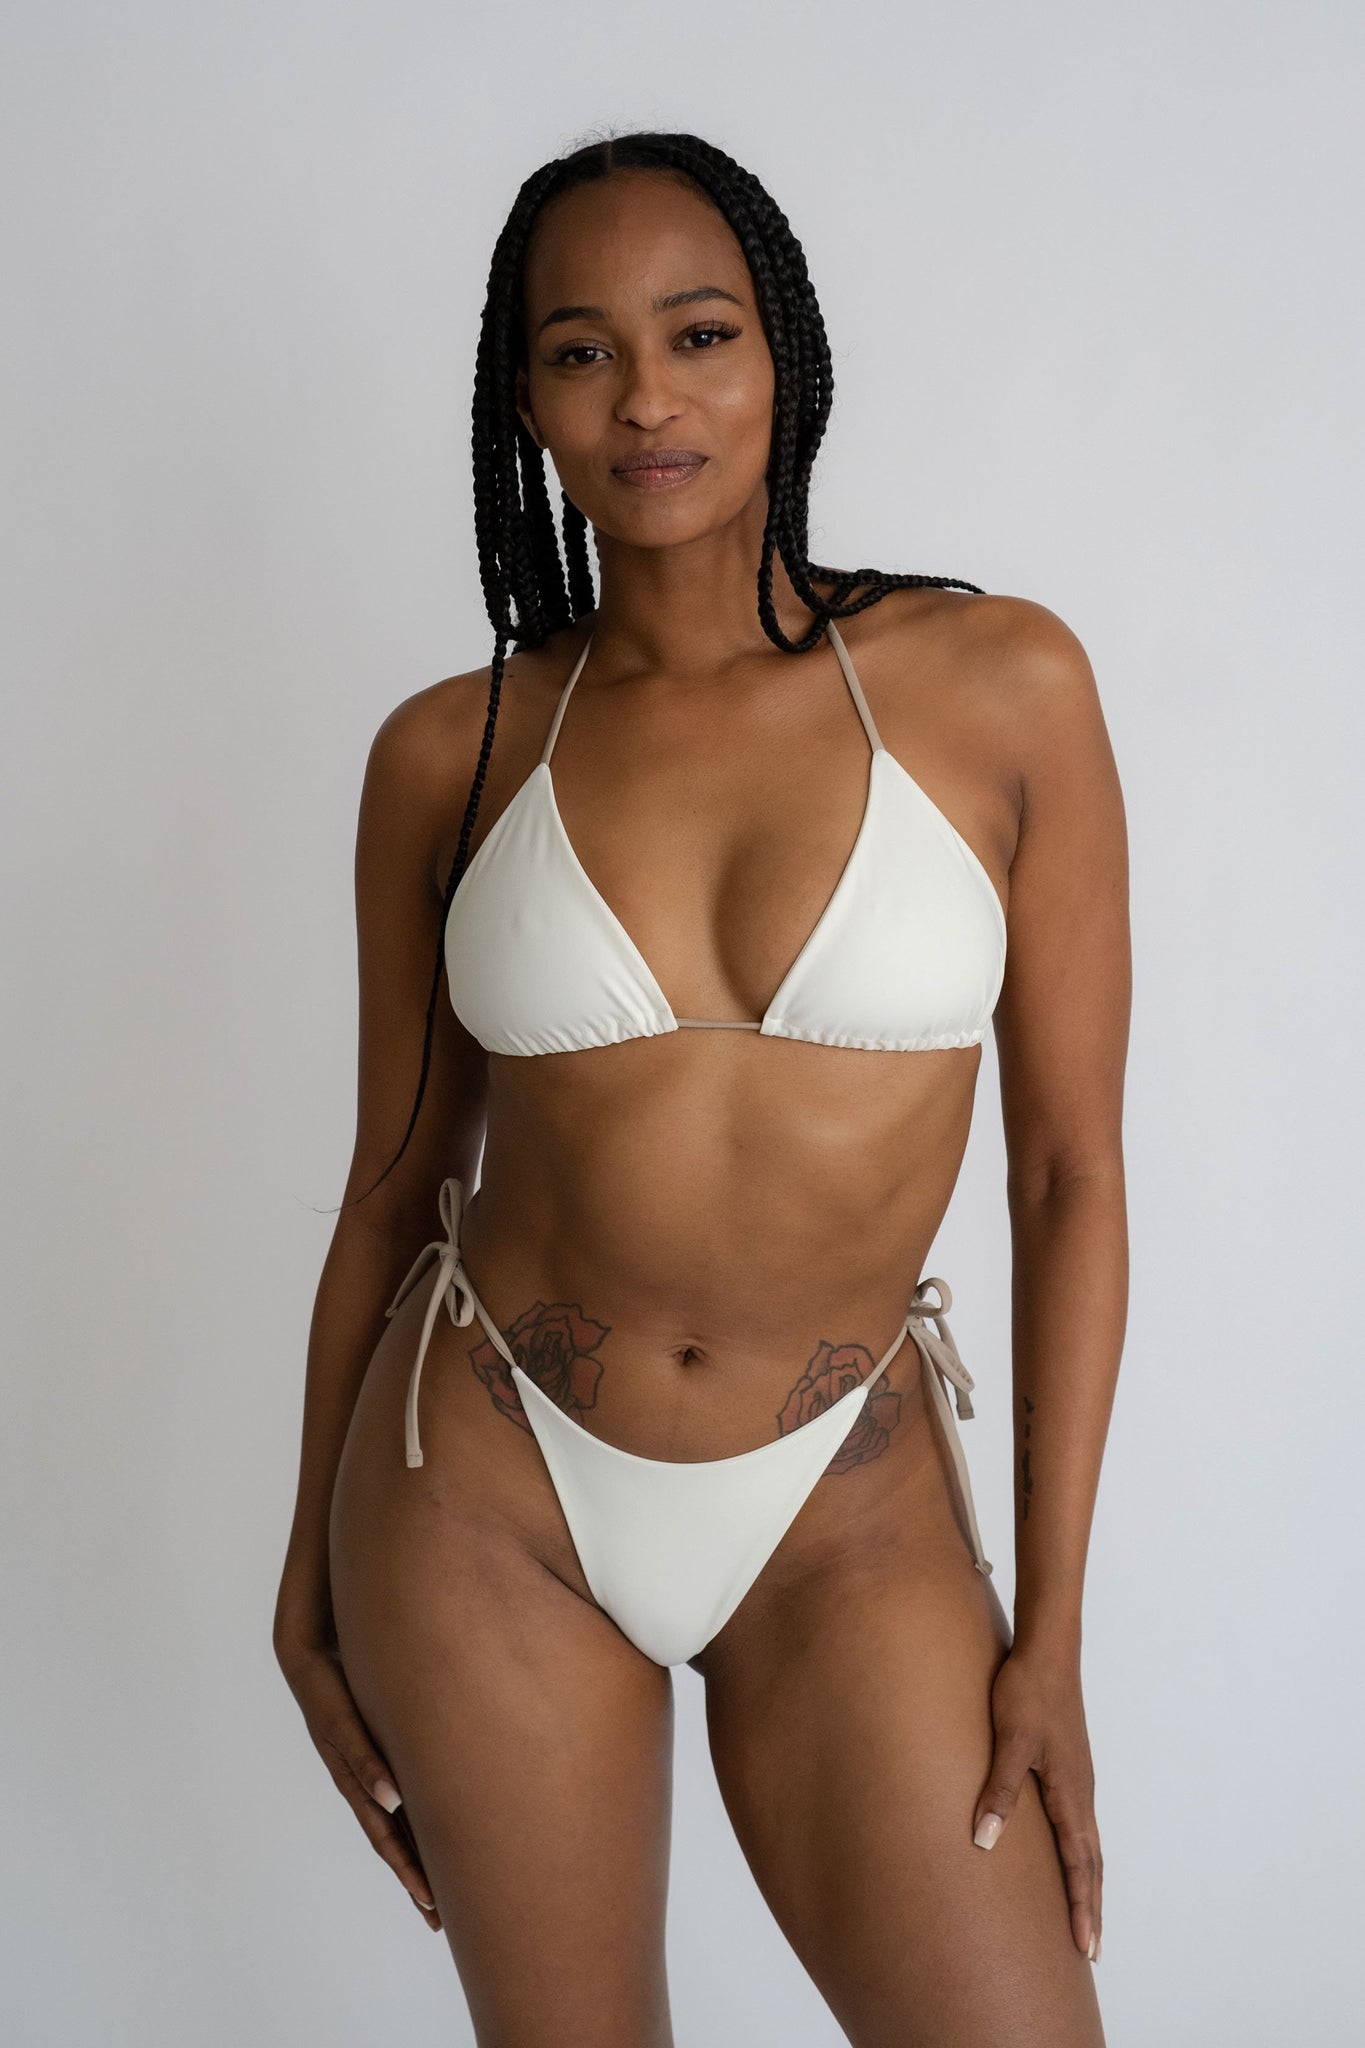 A woman standing with her hands hung by her side wearing white triangle bikini bottoms with nude adjustable strings with a matching white triangle bikini top and nude adjustable straps.